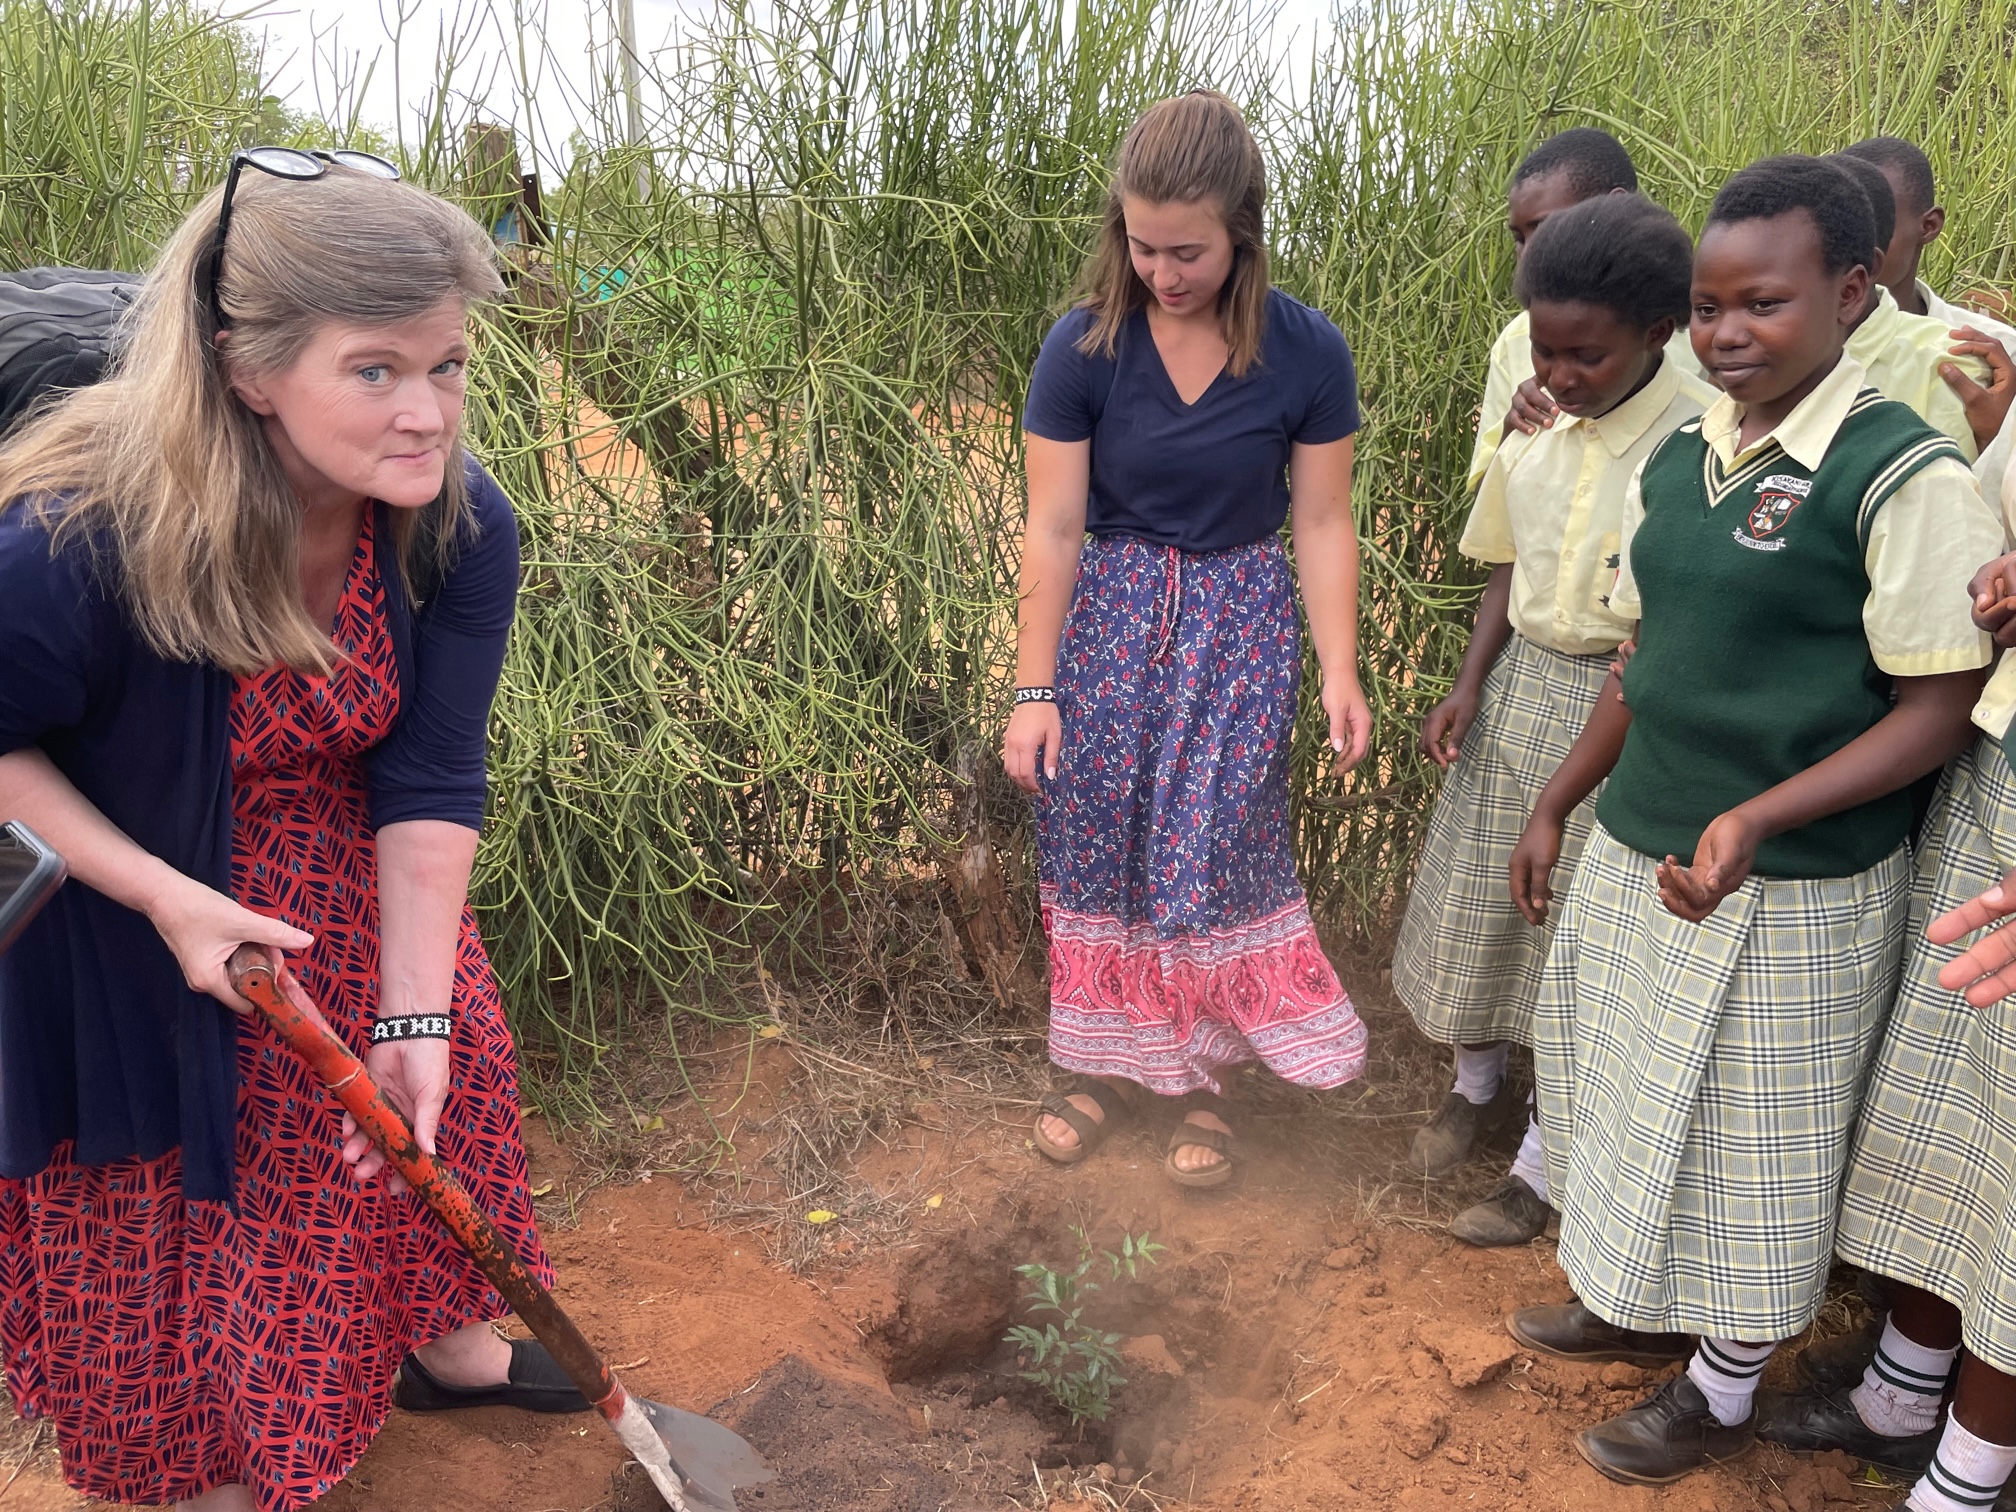 Dr. Heather E. Eves (far left) plants a tree at a high school in Kenya with former student Rachael Mwikali (not pictured), who runs a non-profit called Kibwezi WellWishers (Centre for Sustainability) which focuses on education, health, and environment. Eves’ daughter, Casey, (center) accompanied her on the trip. Photo courtesy of Dr. Heather E. Eves.